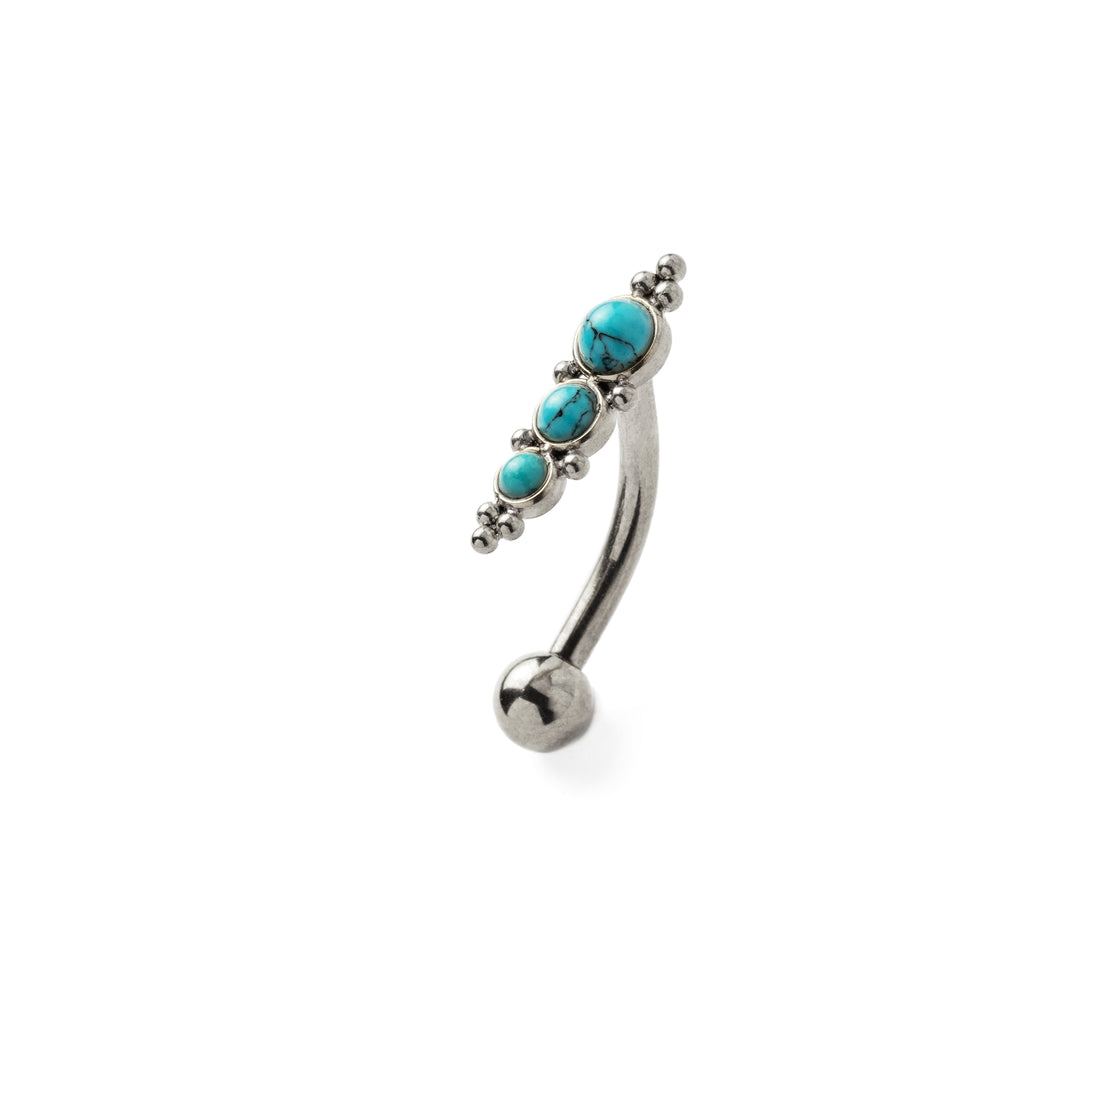 Floating Navel Piercing with Turquoise right side view